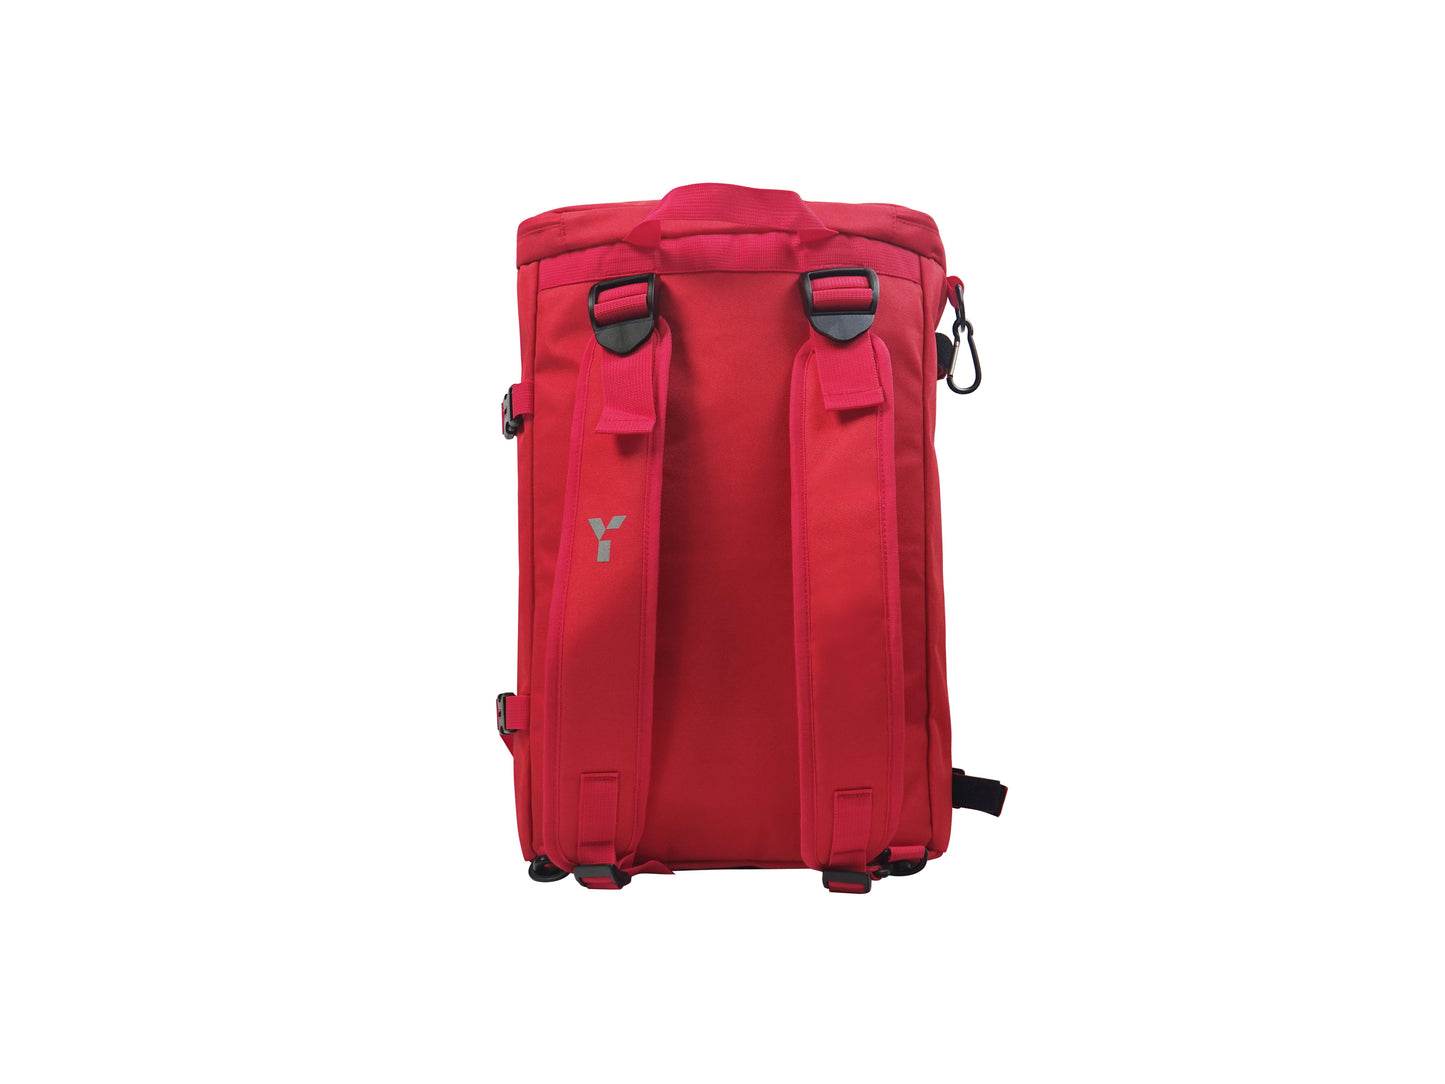 Doncaster HC - Accra Backpack - Red